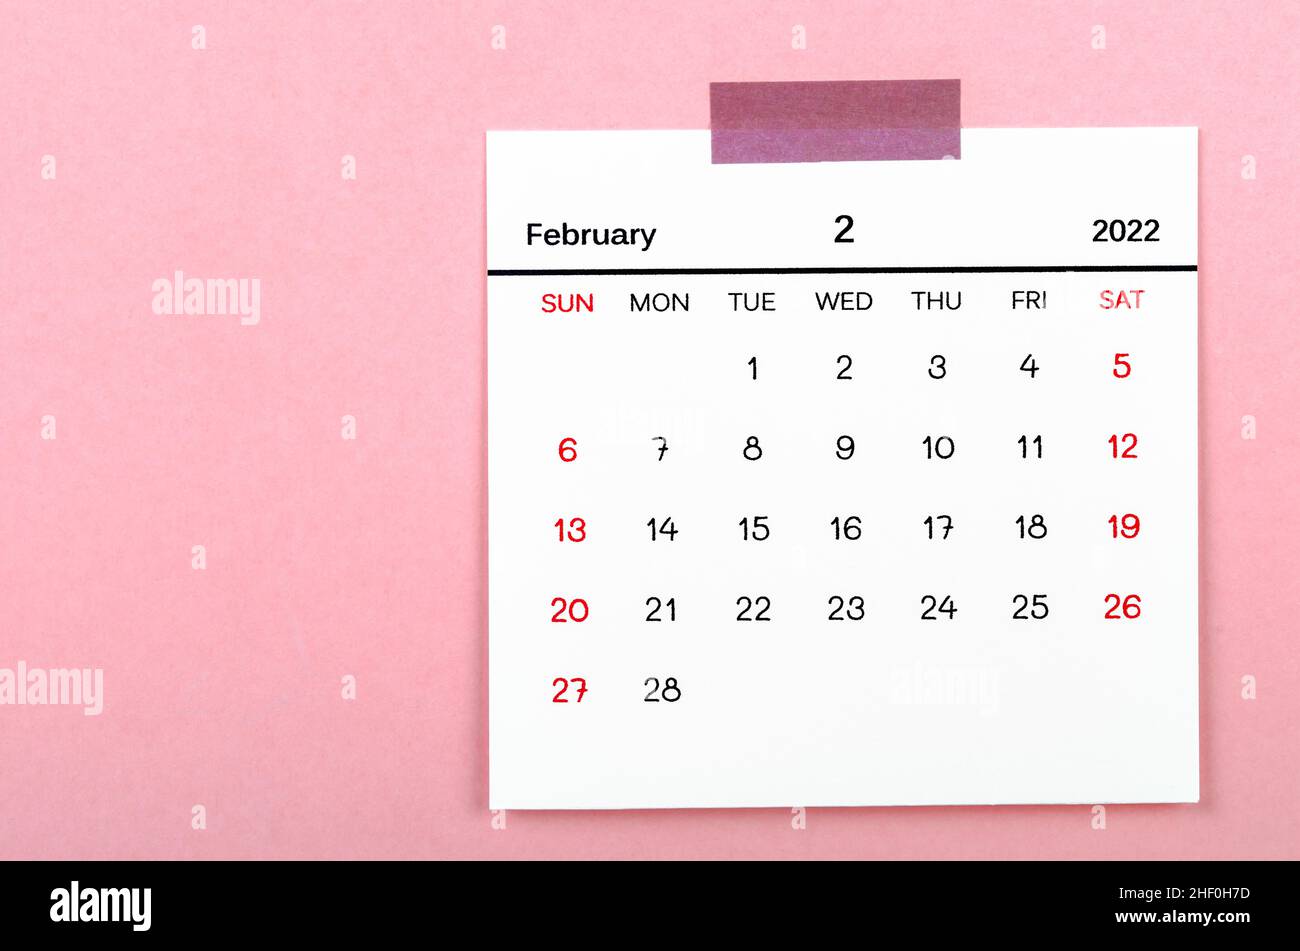 The February 2022 calencar on pink background. Stock Photo